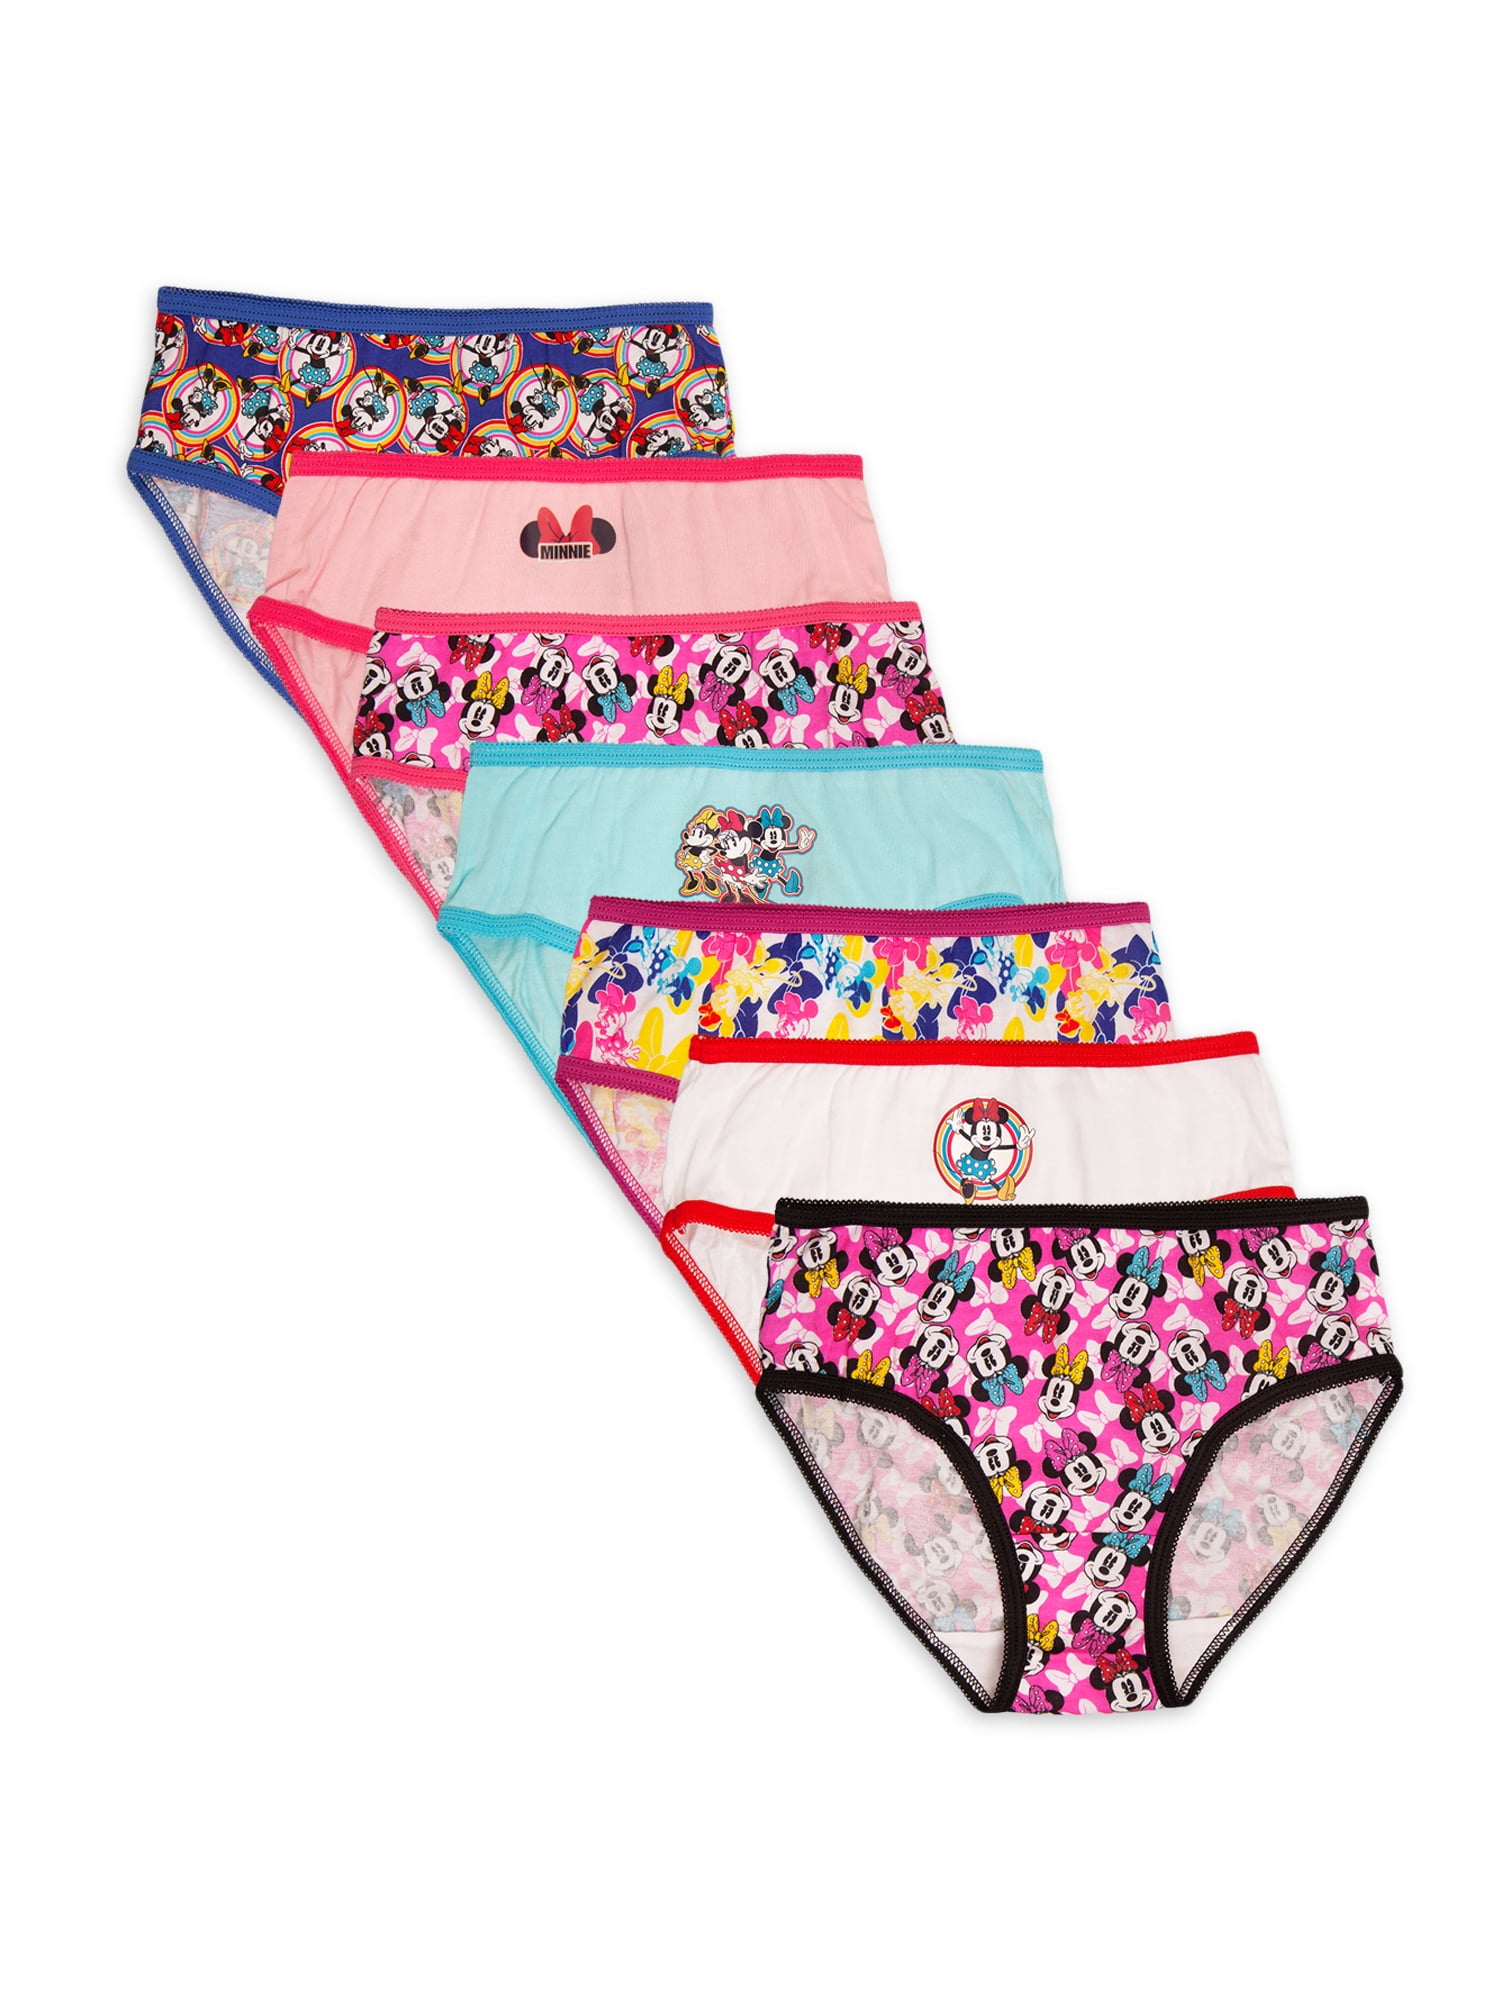 Shimmer and Shine Girls Three Pack Knickers Underwear Set 